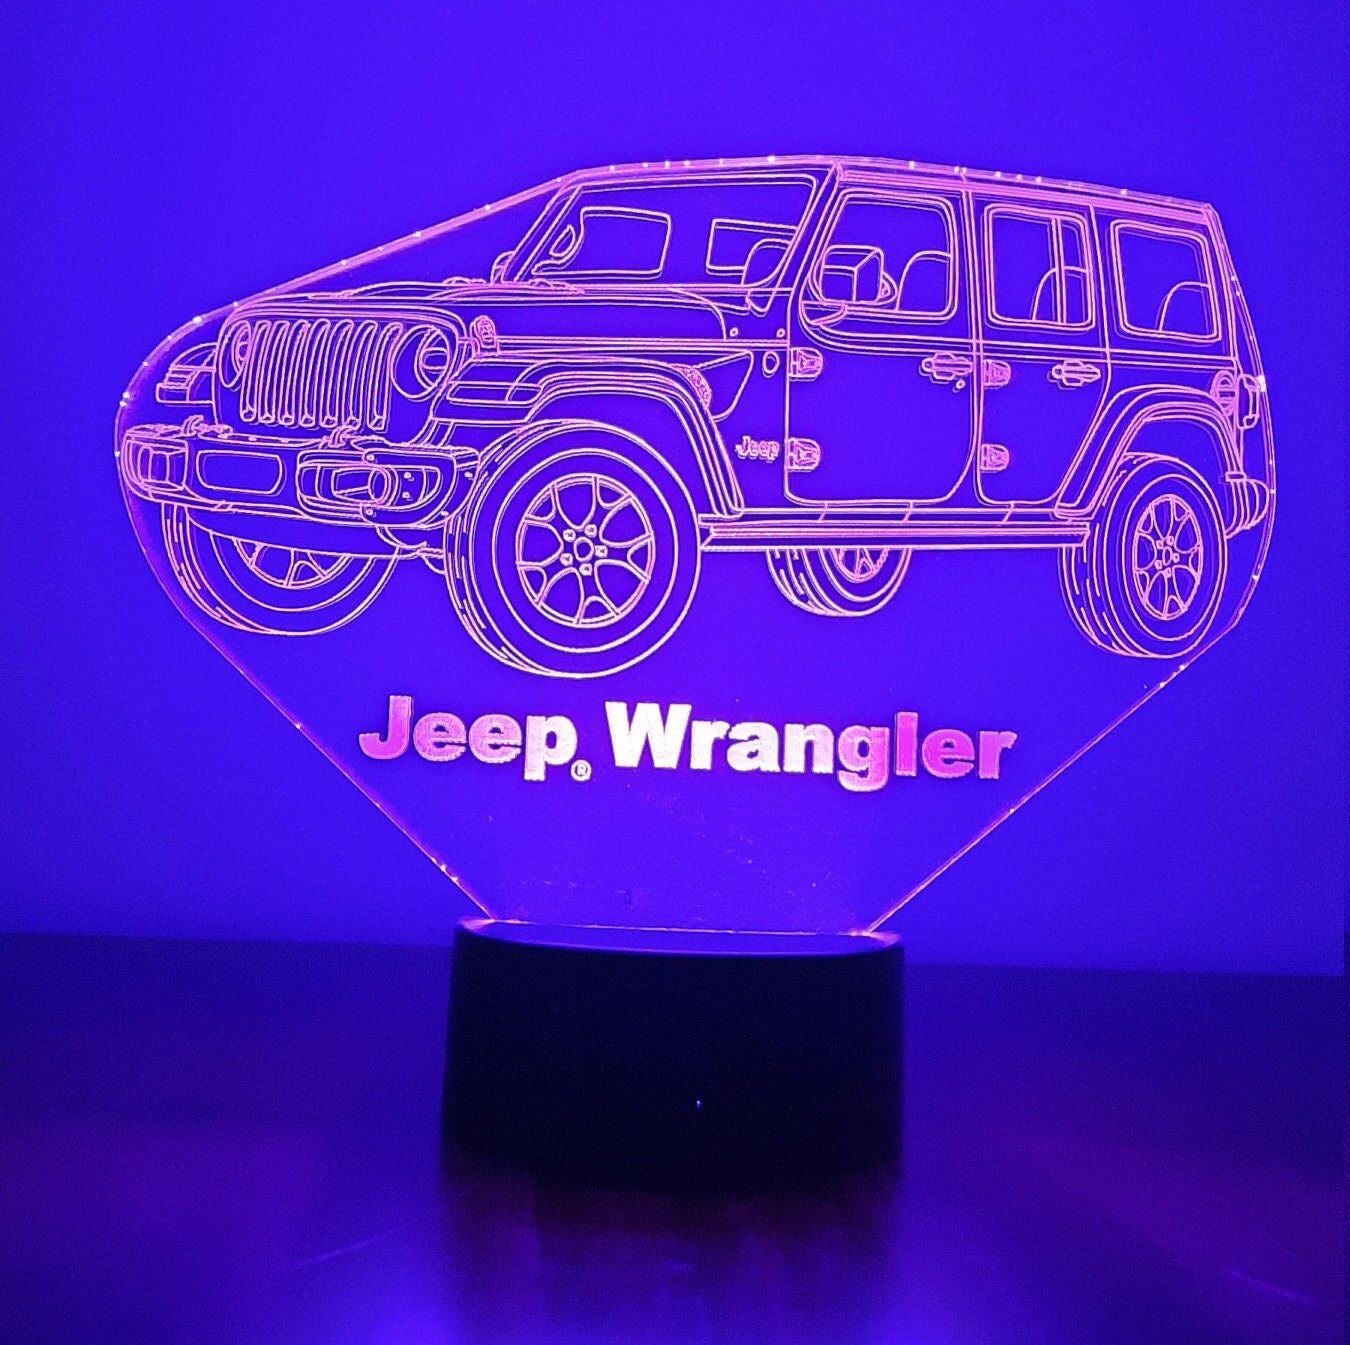 Awesome "Jeep Wrangler" 3D LED lamp (1282) - FREE SHIPPING!